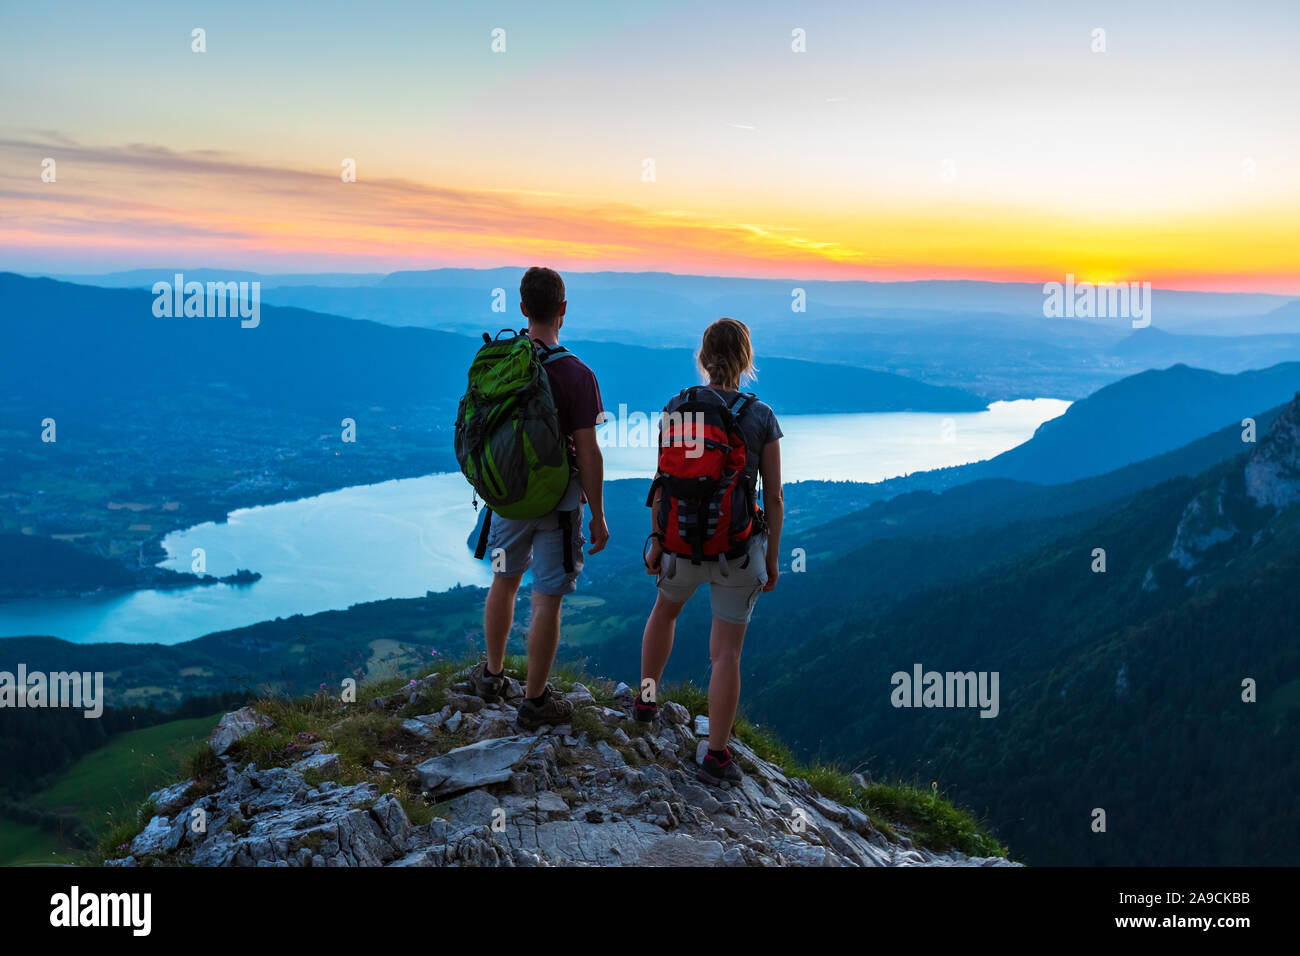 Hikers enjoying scenic view of valley with lake at sunset, couple enjoying summer outdoor trek in mountains, active lifestyle, two people backpacking Stock Photo